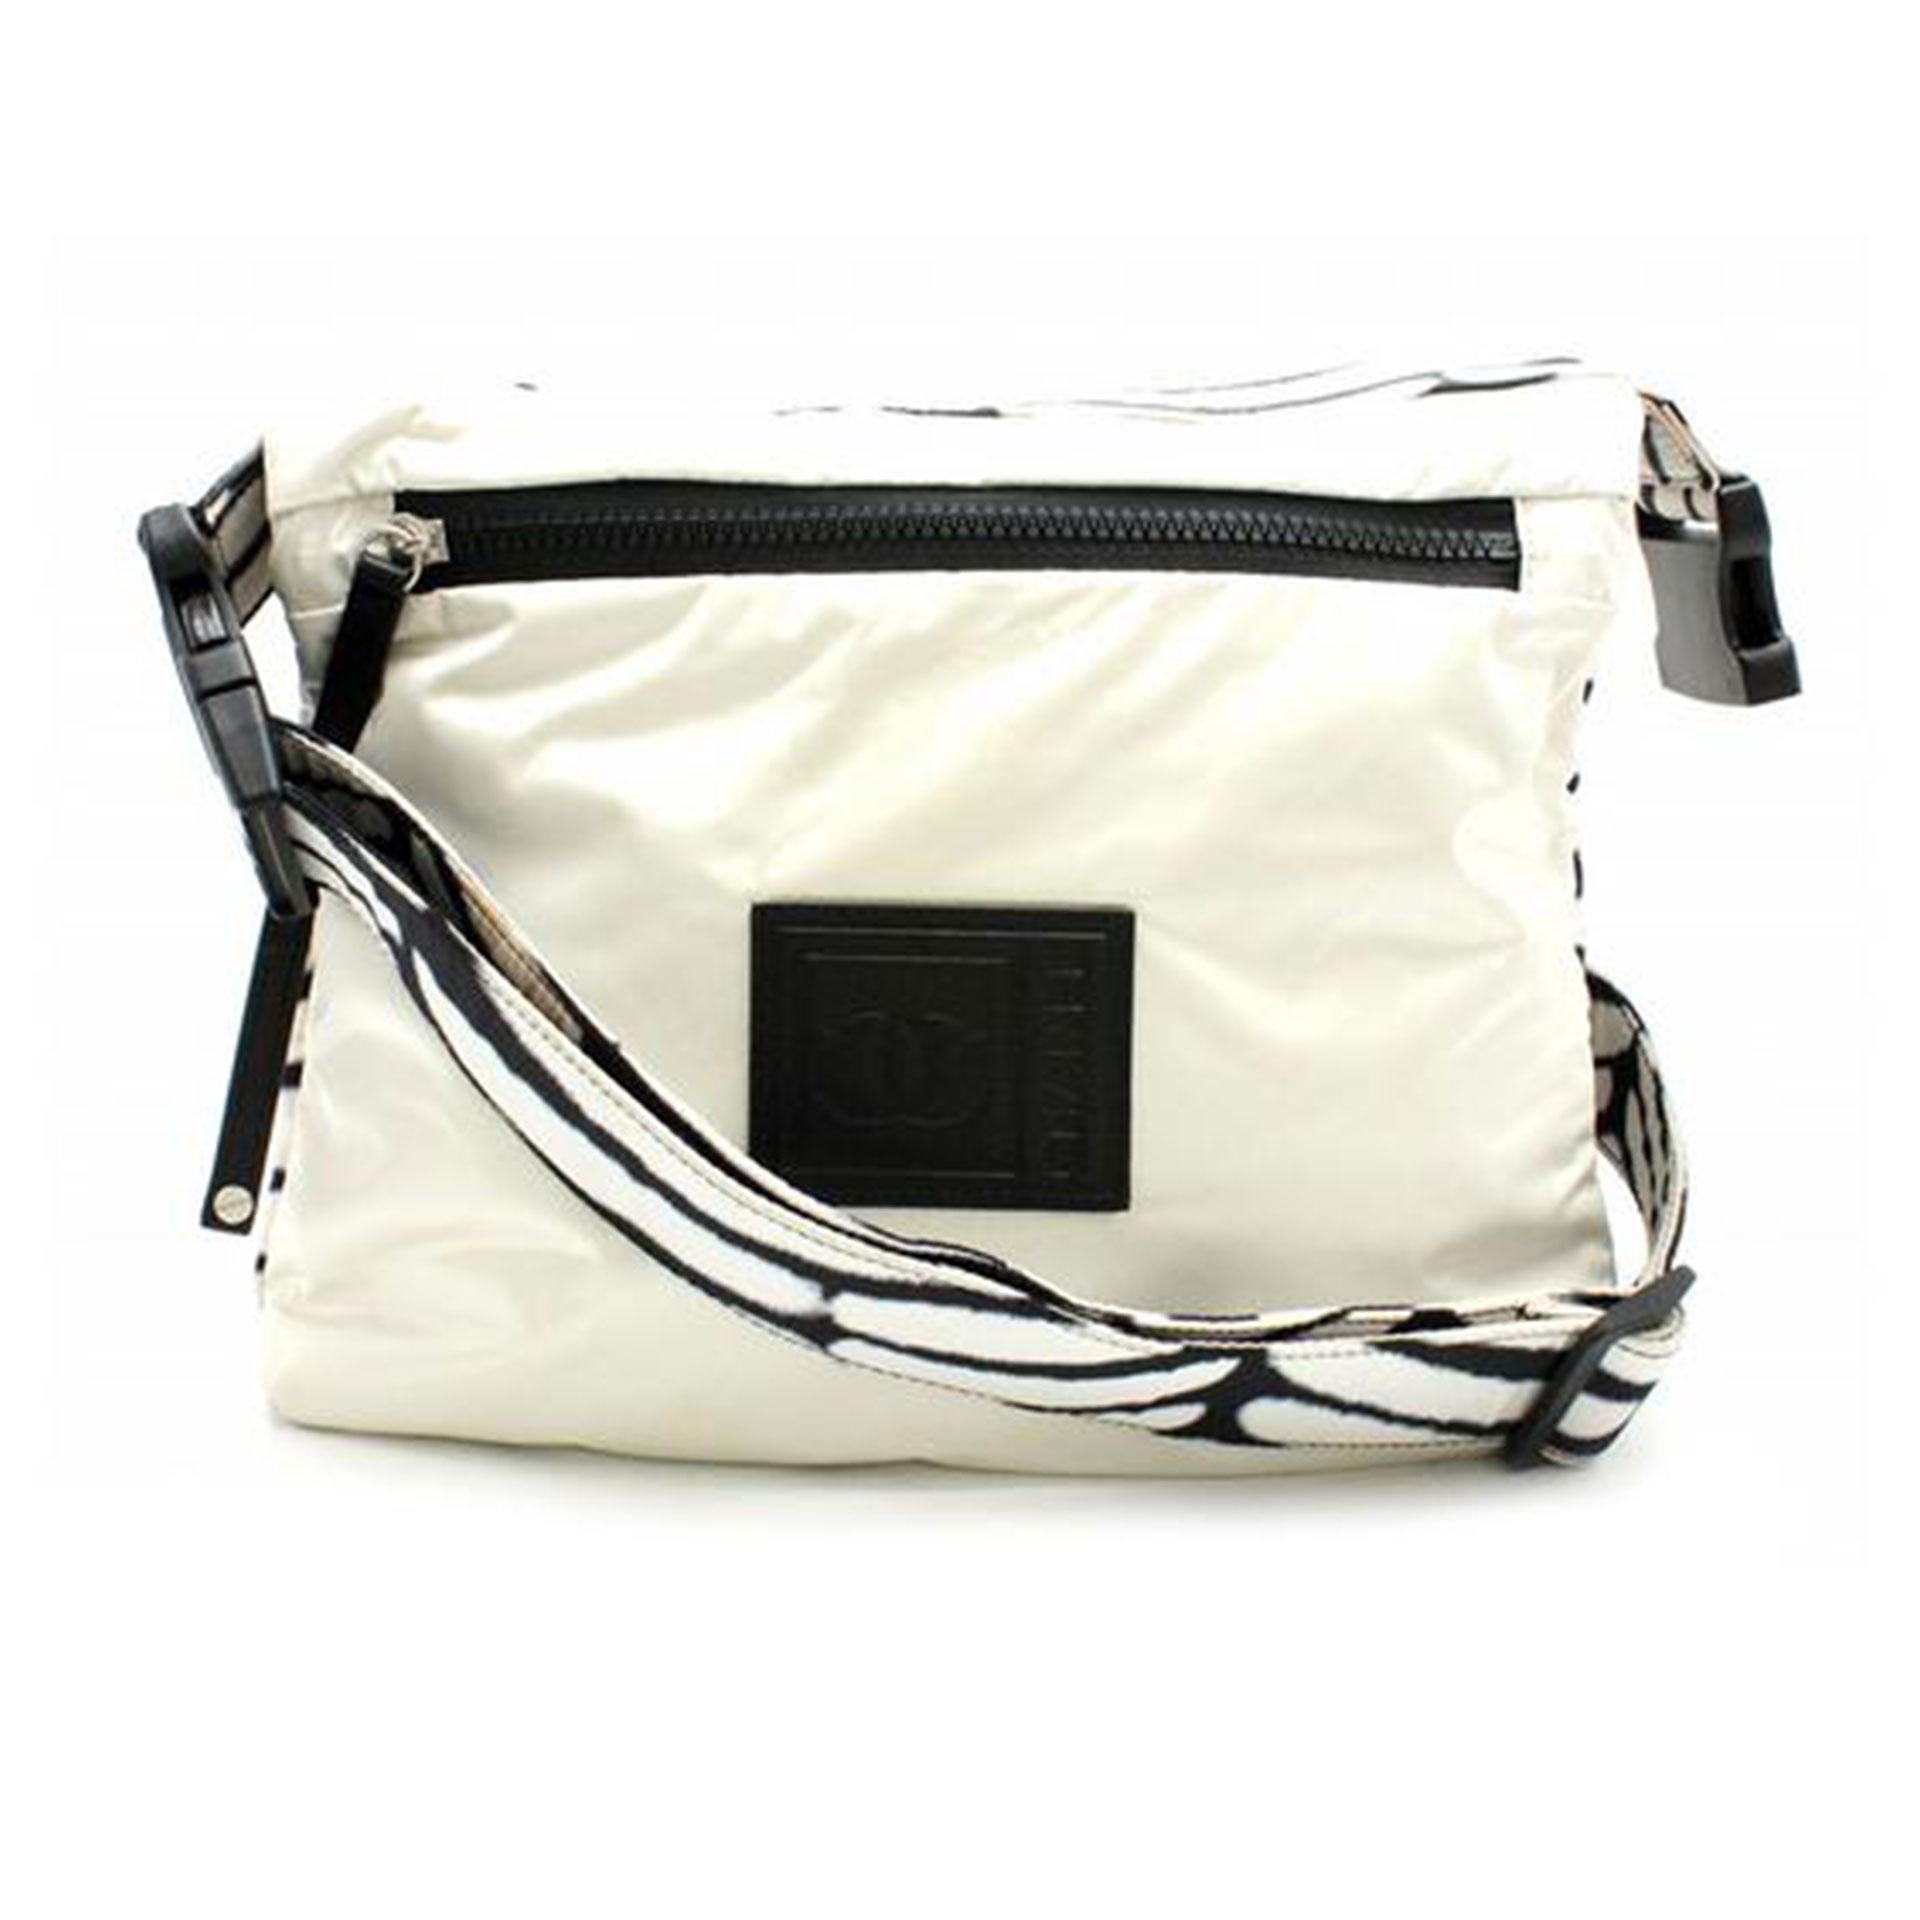 Chanel Vintage Black and White Crossbody Waist Bag

Made in Italy

